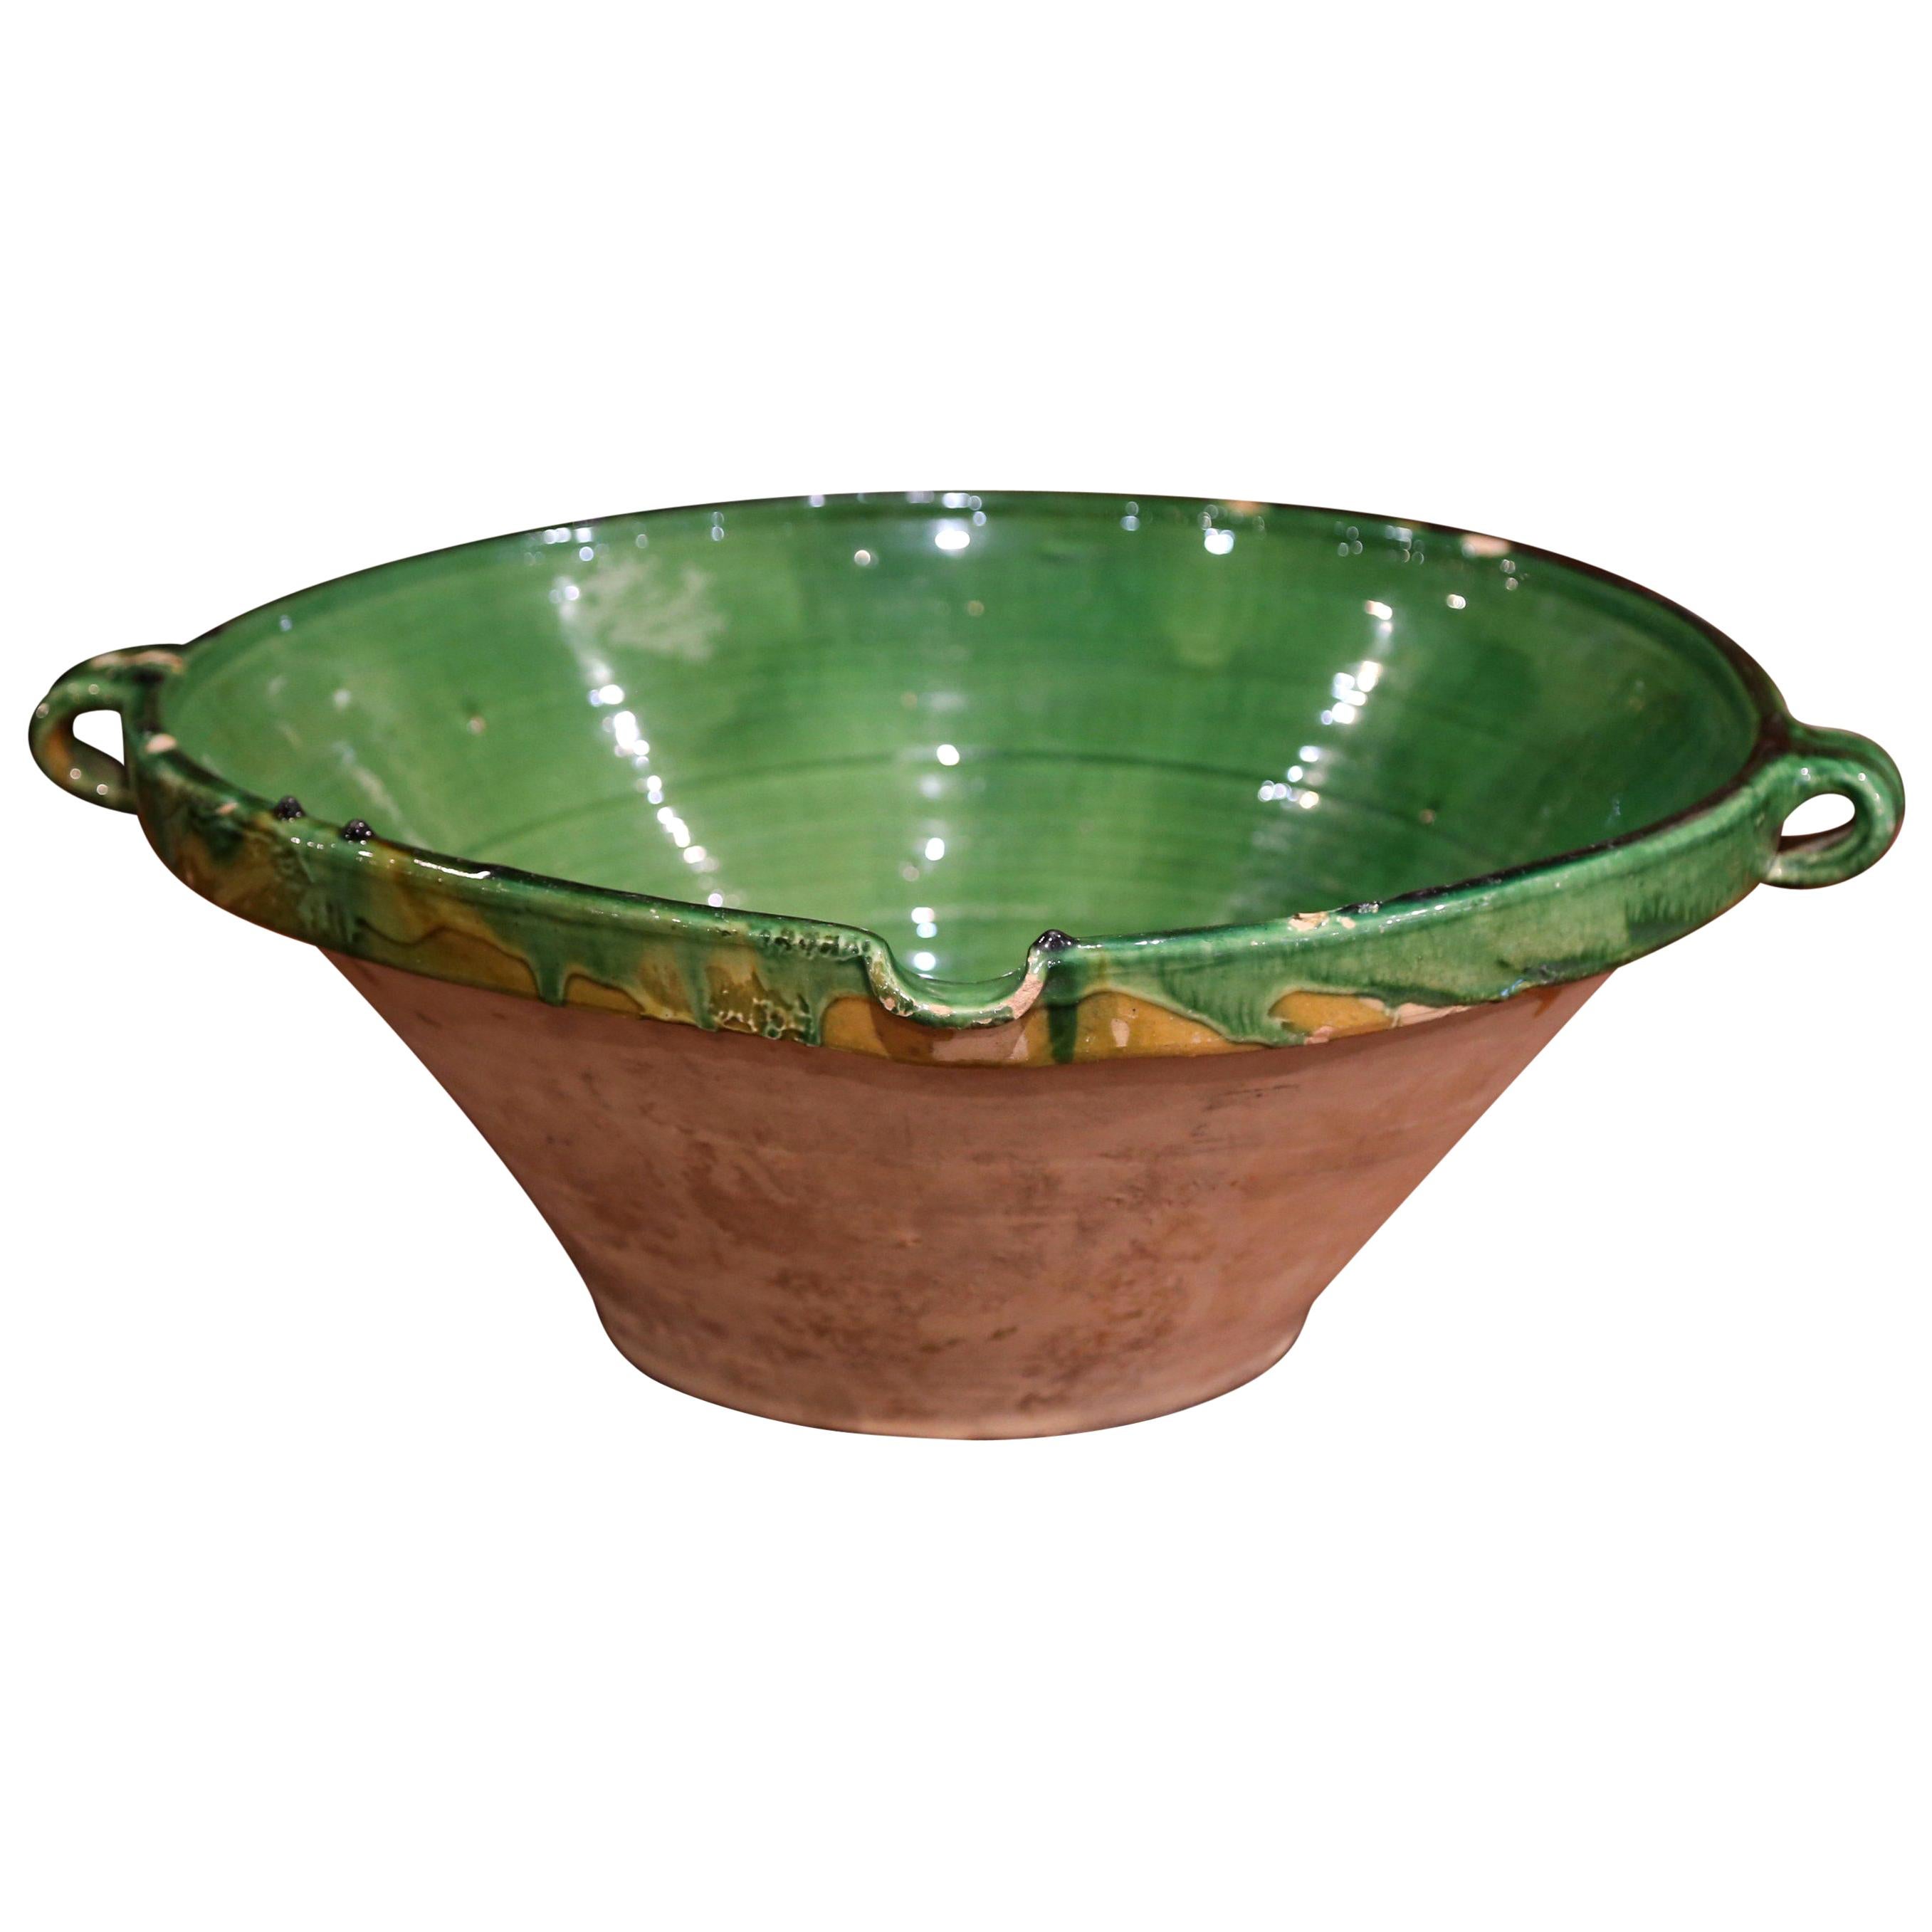 19th Century French Green Glazed Terracotta Decorative Bowl from Provence